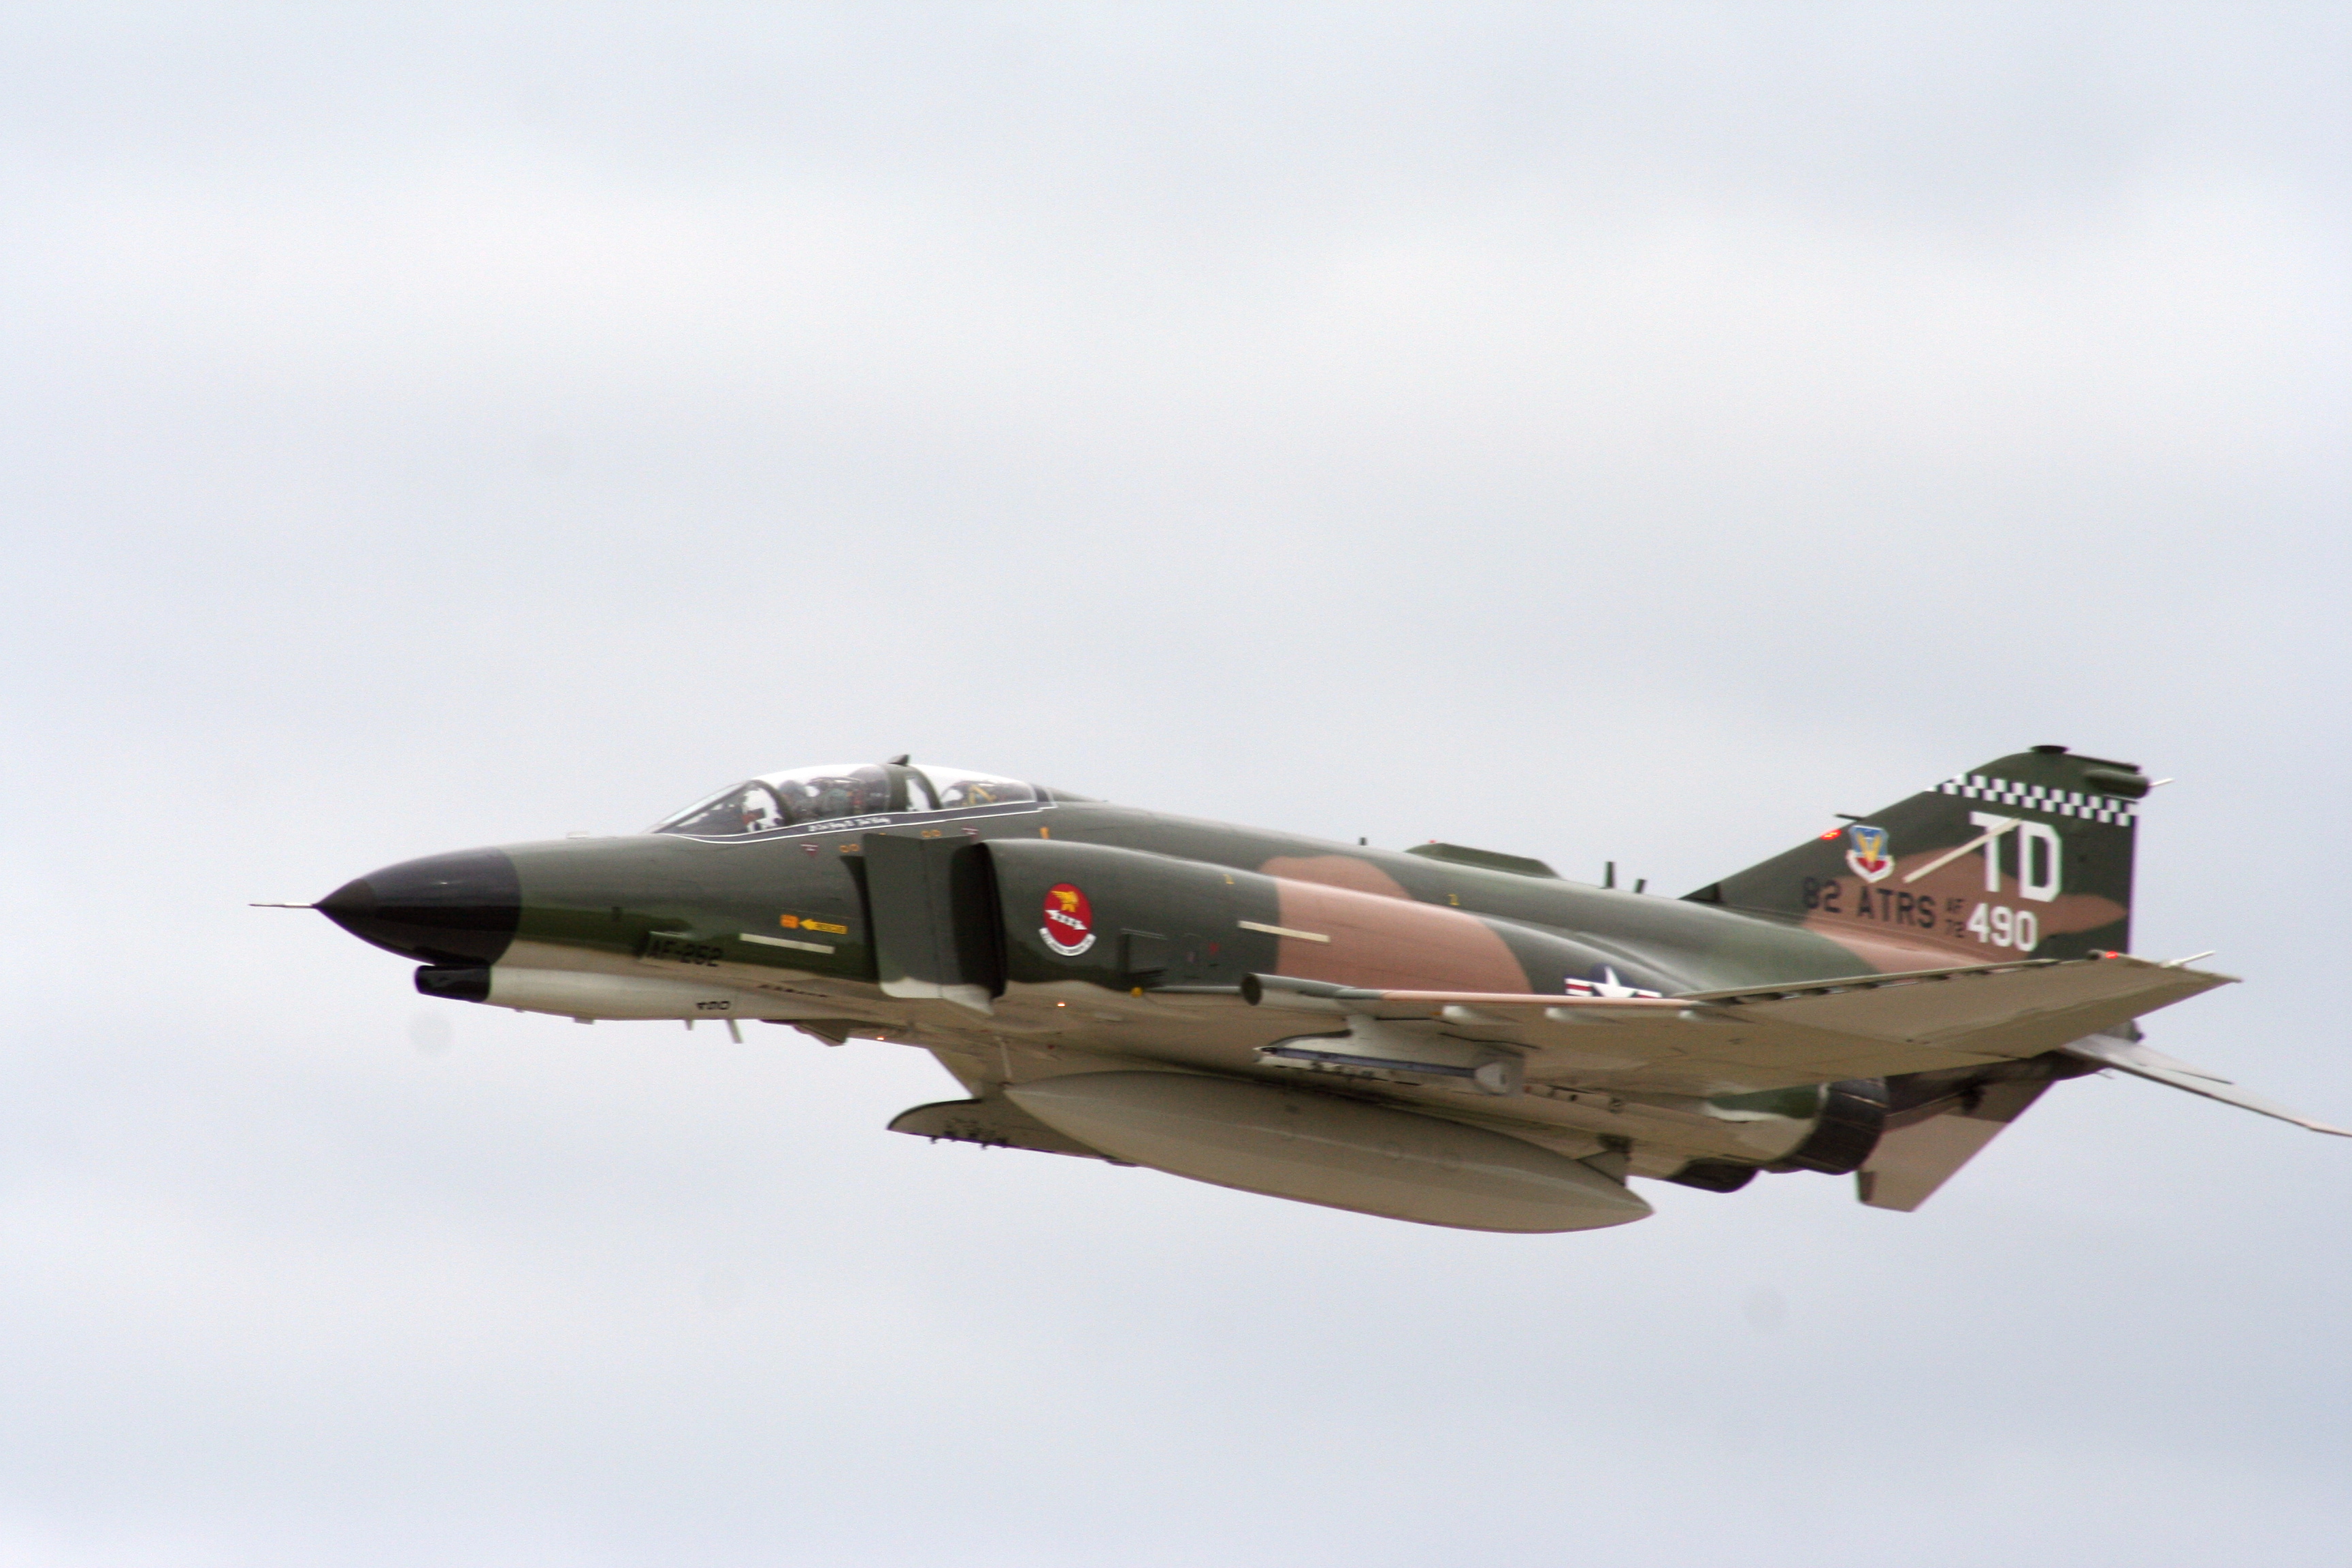 Qf-4e from the 82 aerial targets squadron, usaf, c.2005 photo